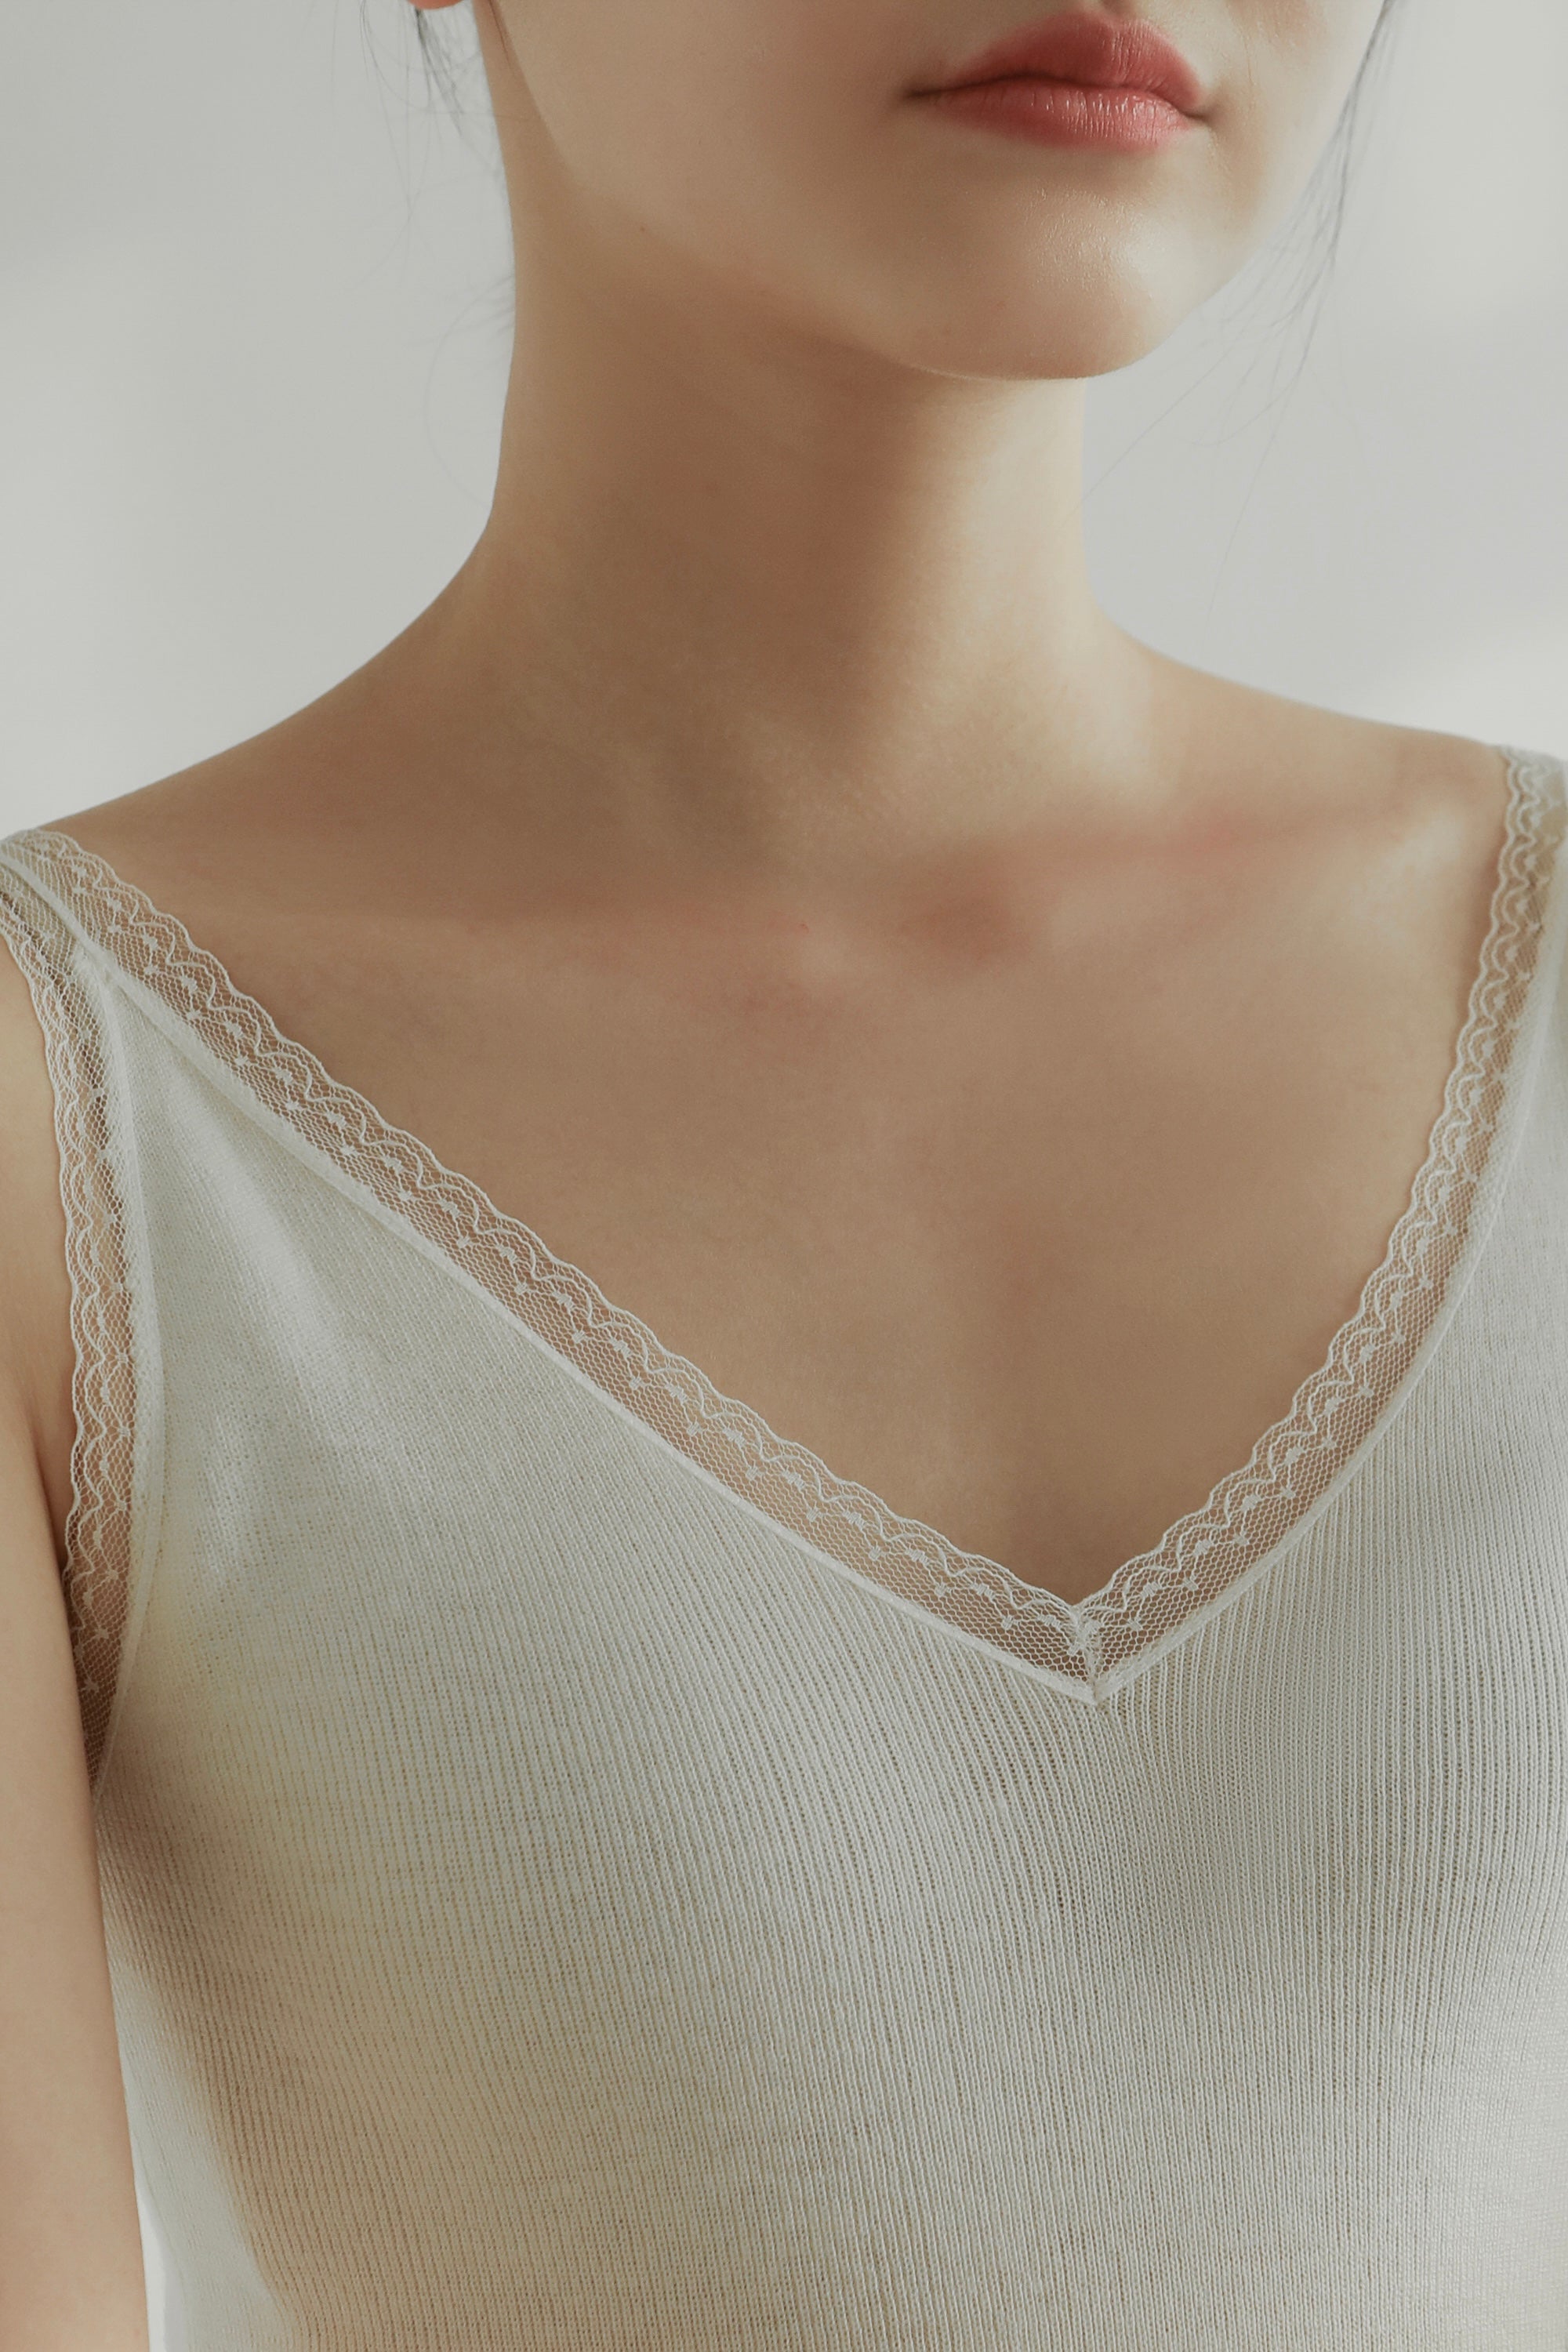 Soft Moment Cashmere And Wool Blend Tank - White